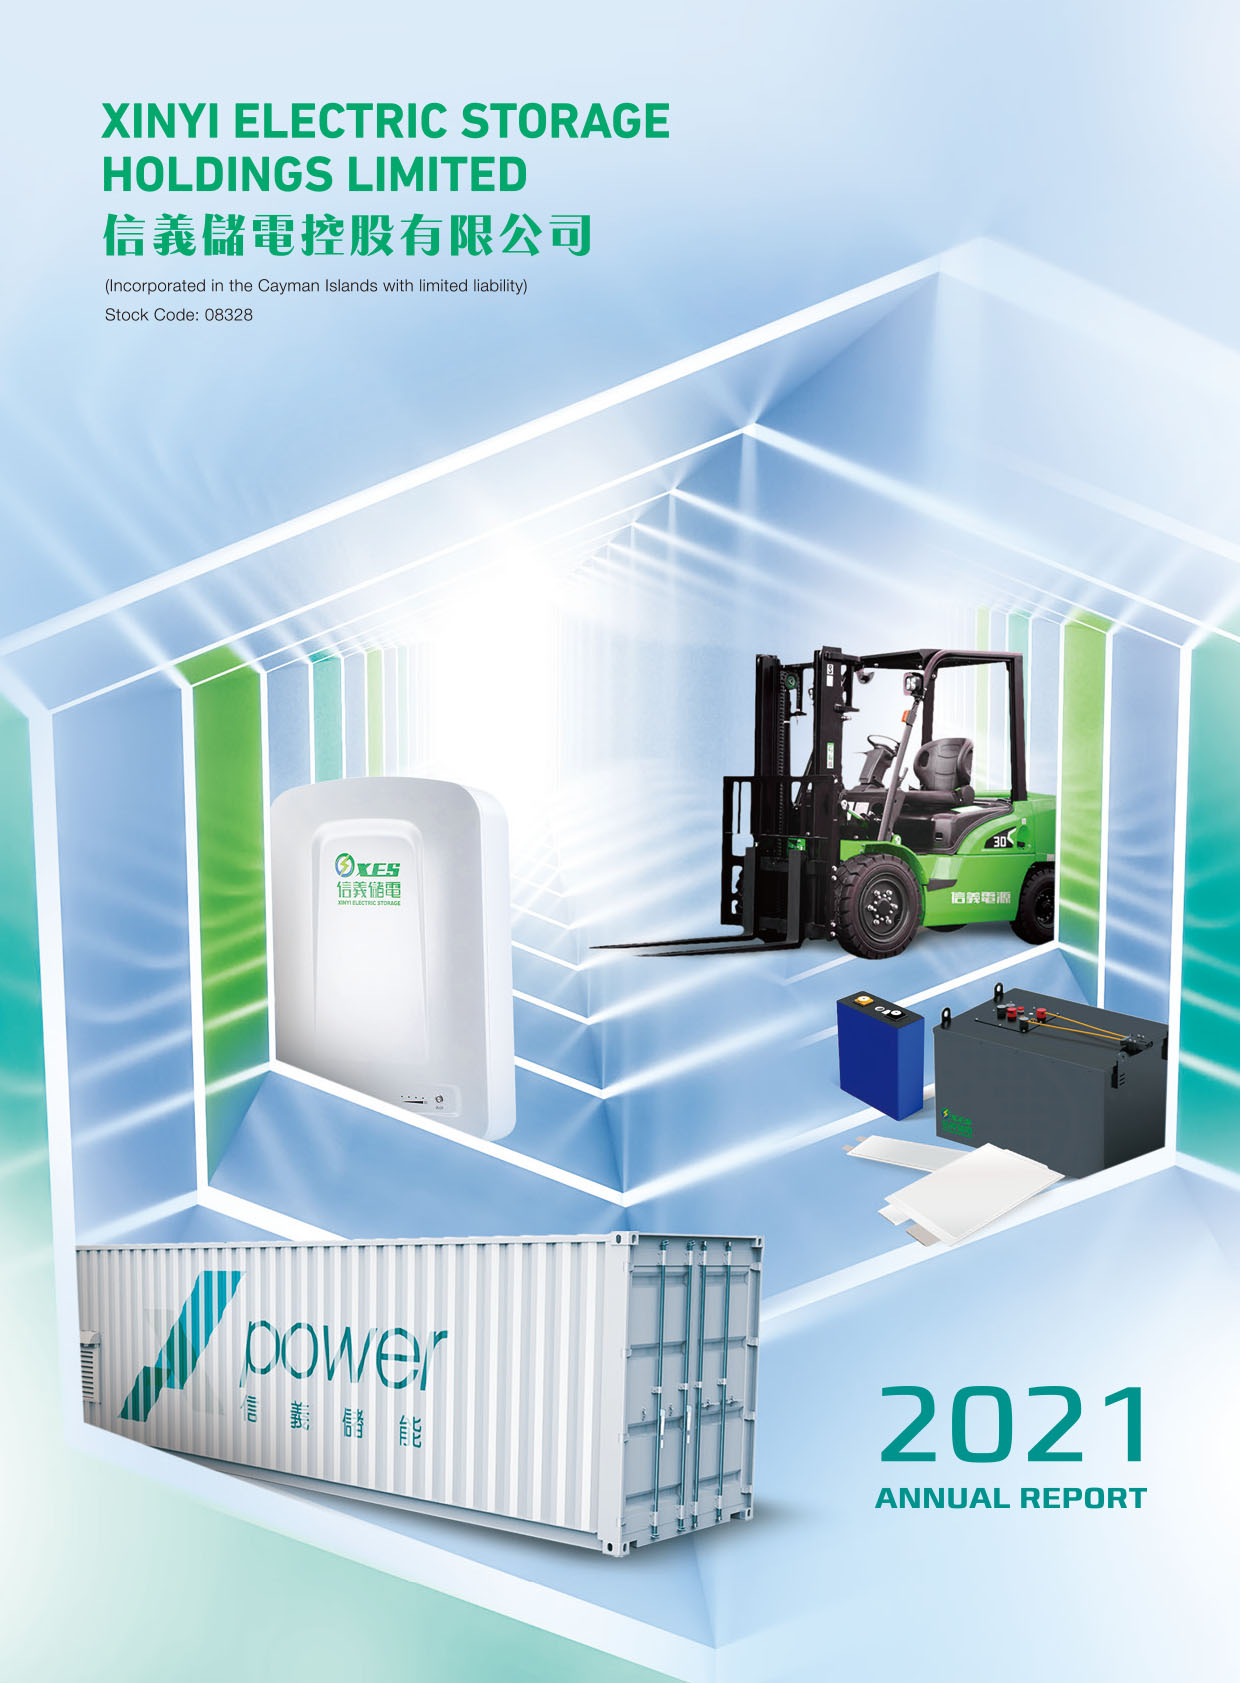 XINYI ELECTRIC STORAGE HOLDINGS LIMITED